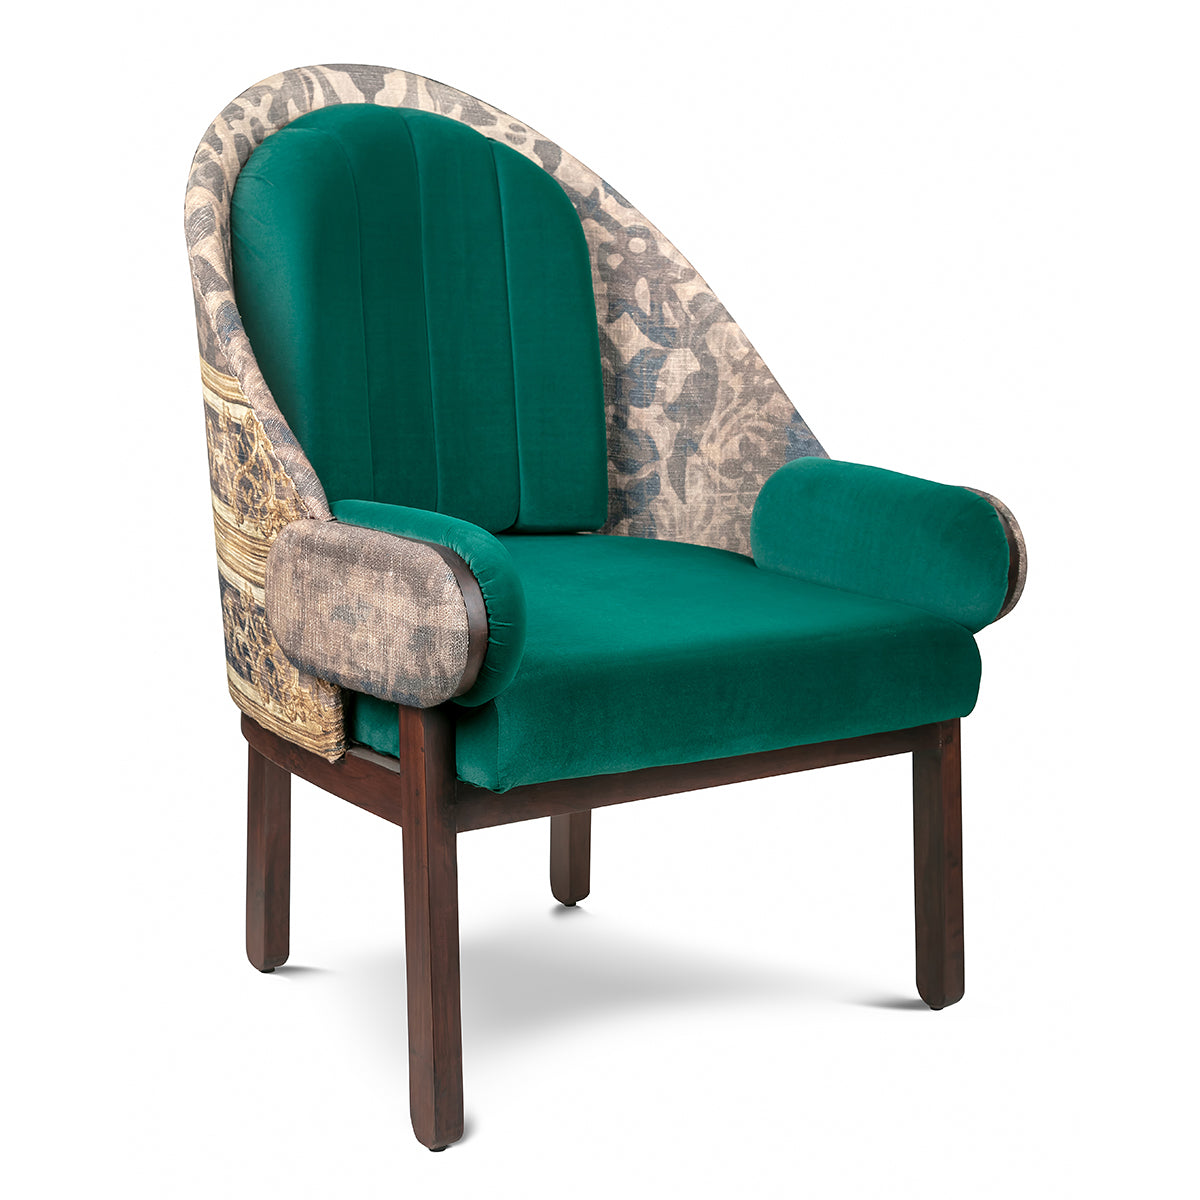 Oval Chair Vibrant Green